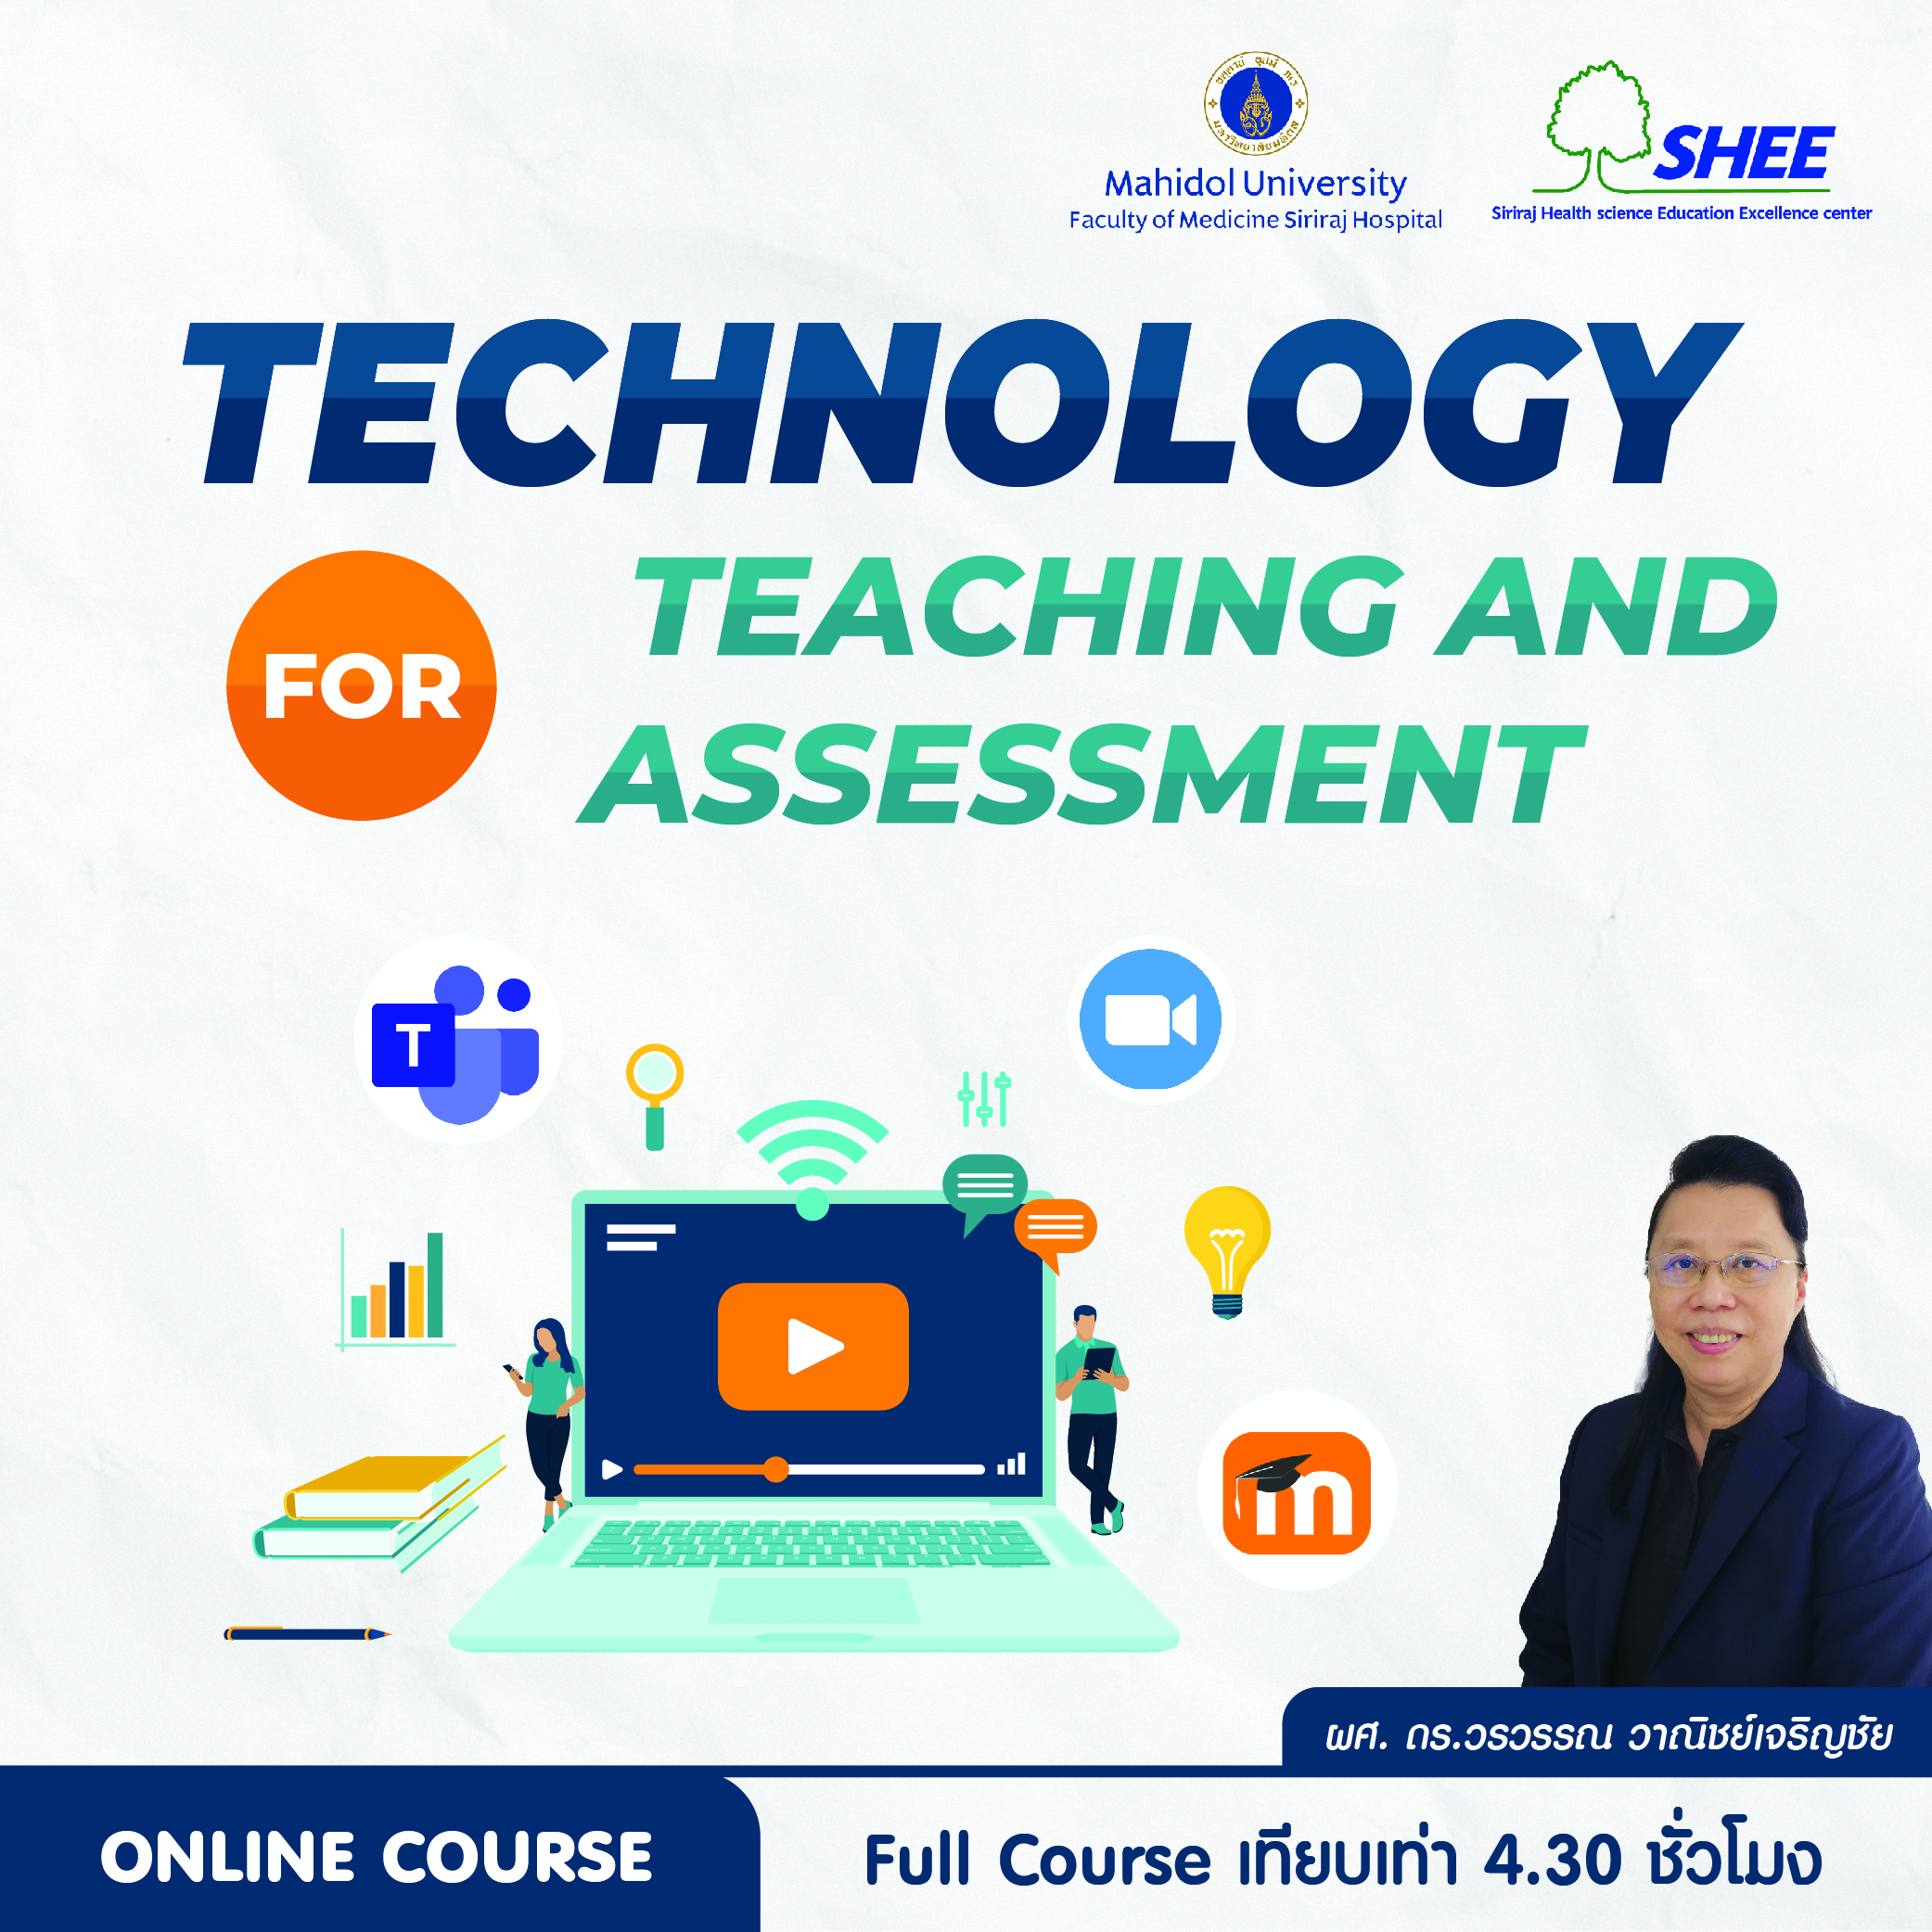 Technology for Teaching and Assessment (4.5 ชม.)